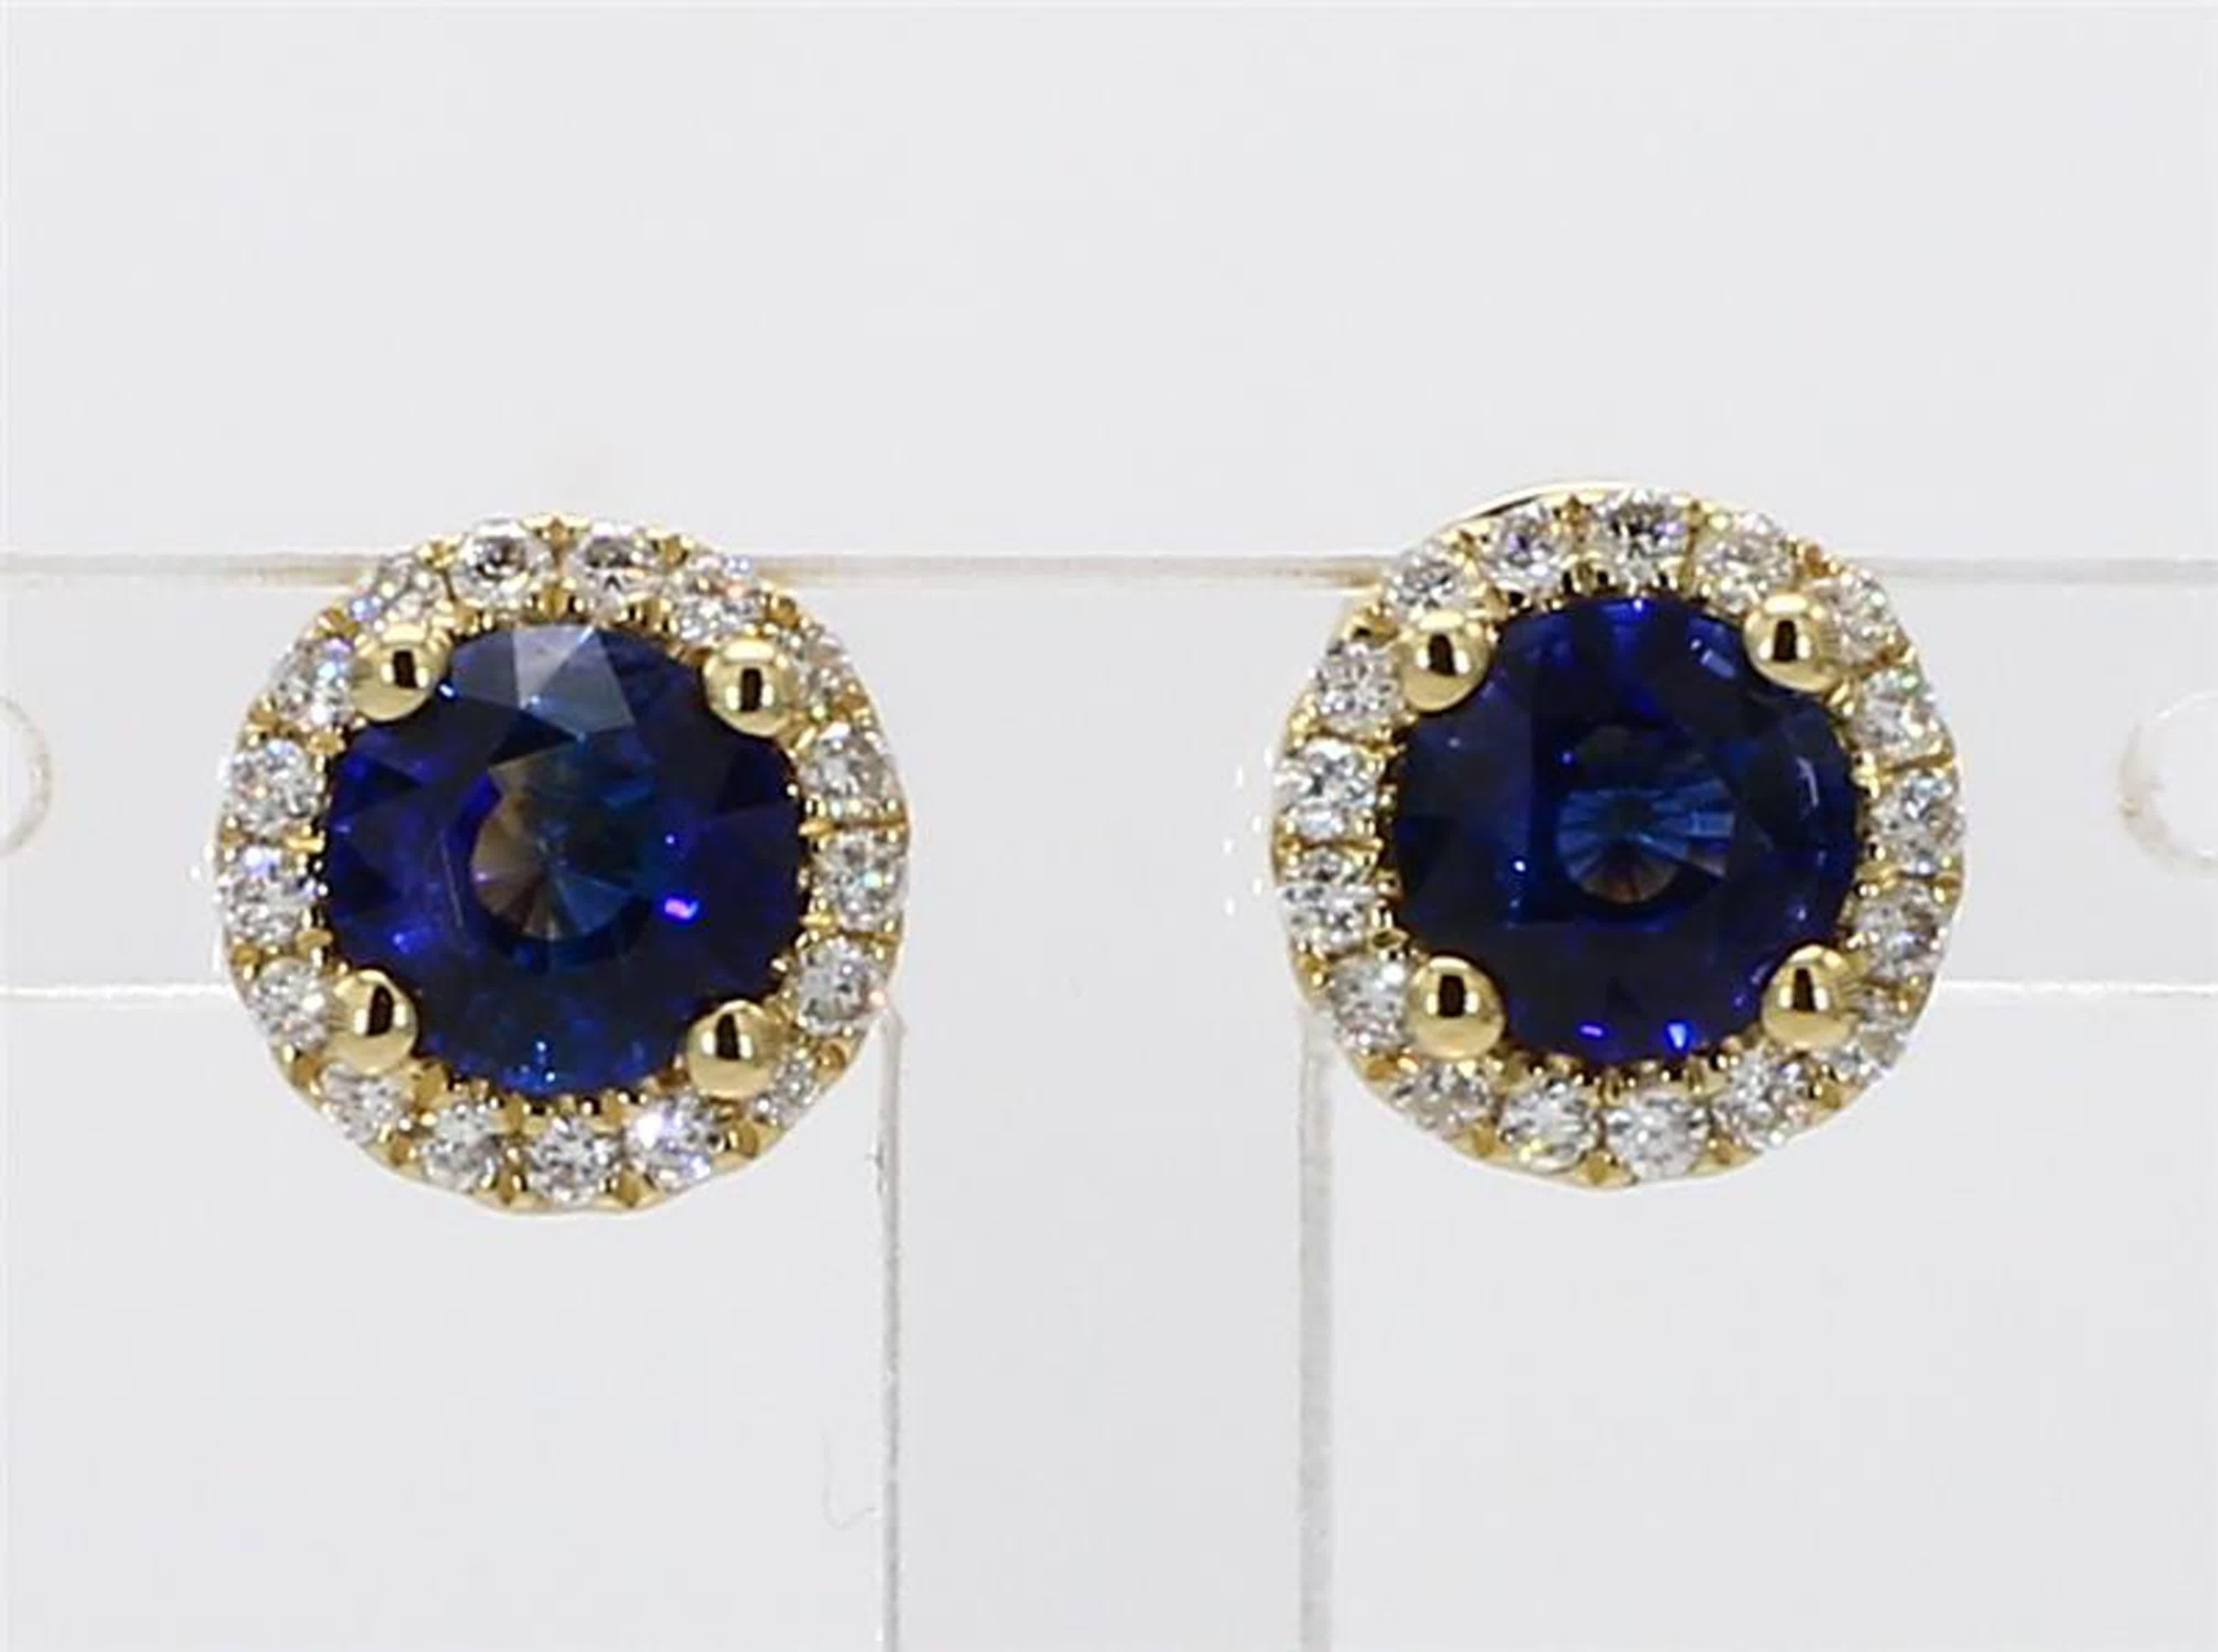 RareGemWorld's classic sapphire earrings. Mounted in a beautiful 14K Yellow Gold setting with natural round cut blue sapphires. The sapphires are surrounded by natural round white diamond melee in a beautiful single halo. These earrings are